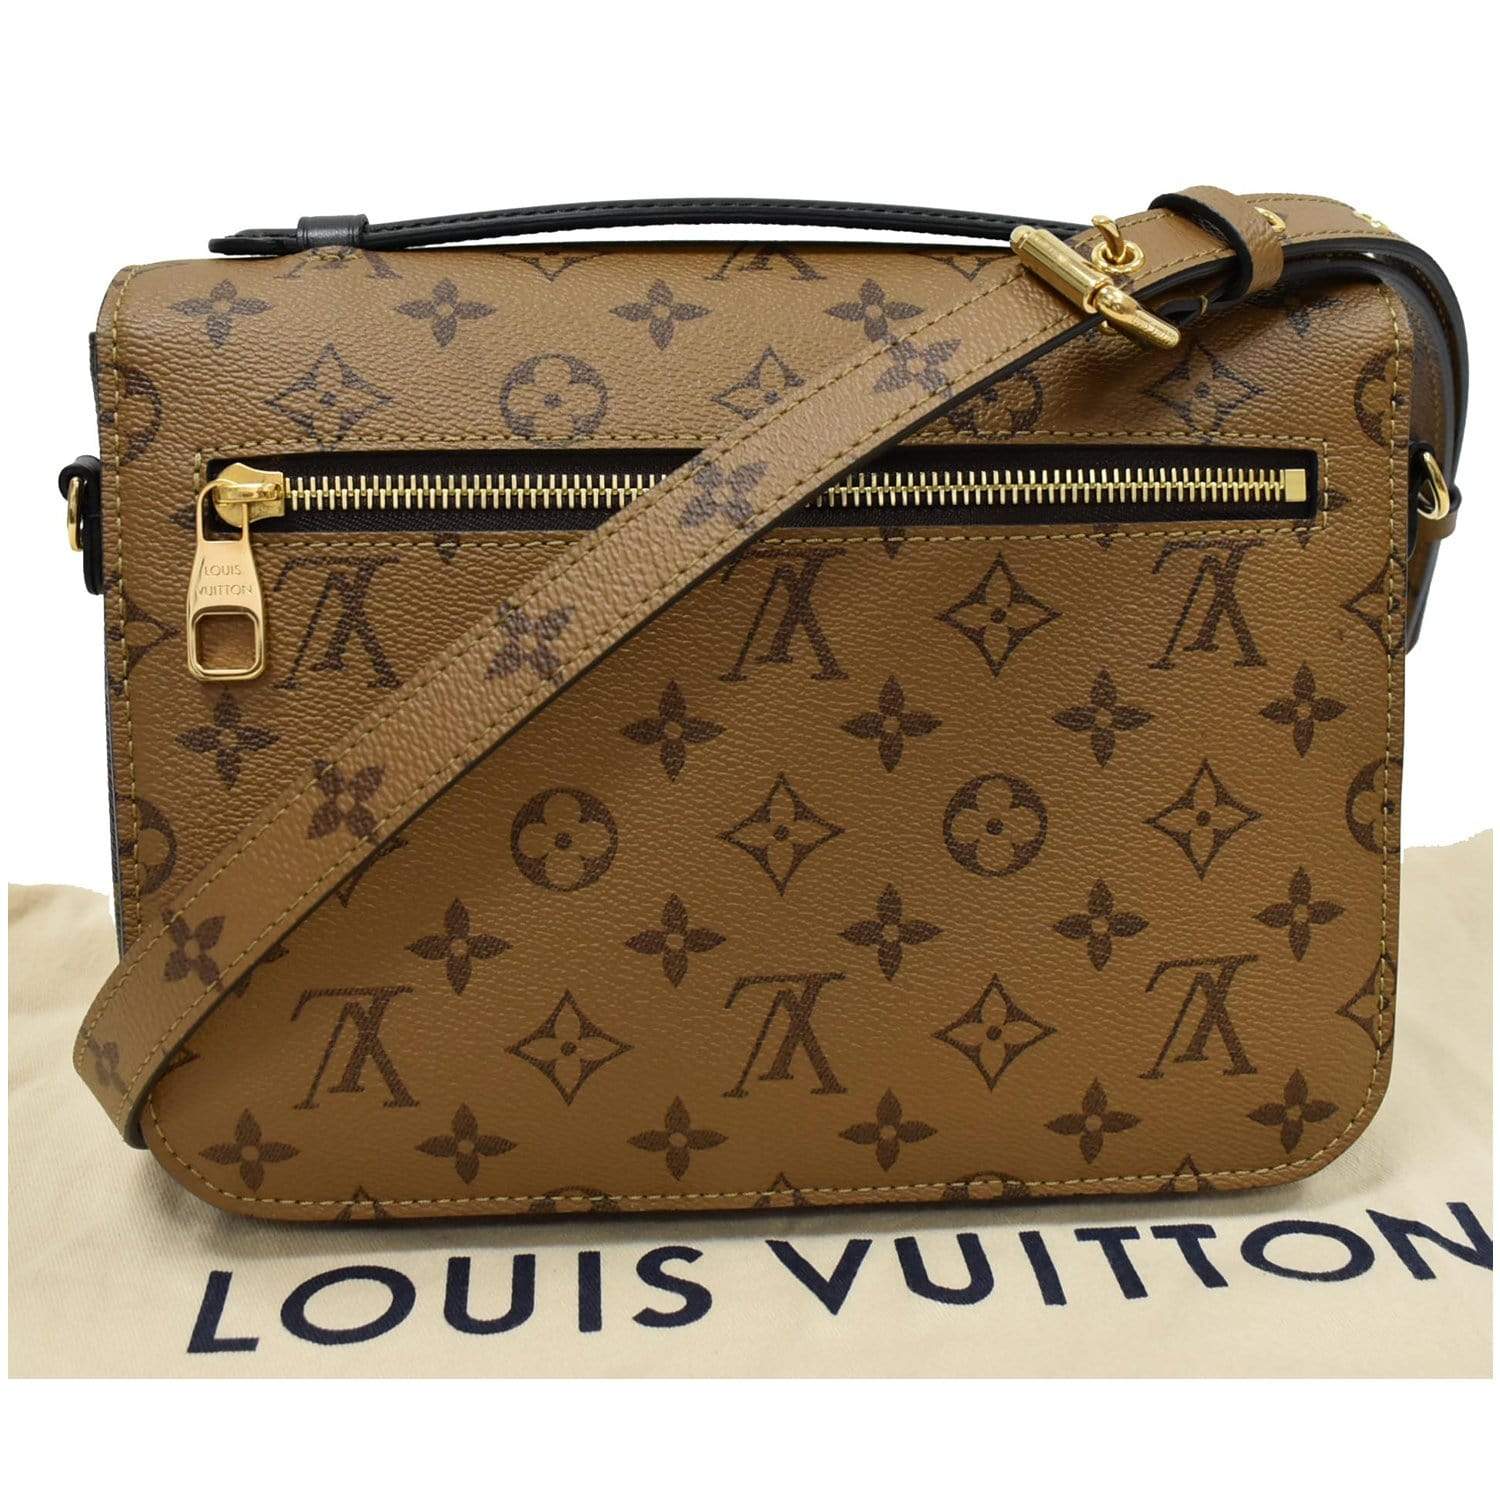 Metis leather crossbody bag Louis Vuitton Brown in Leather - 38097907